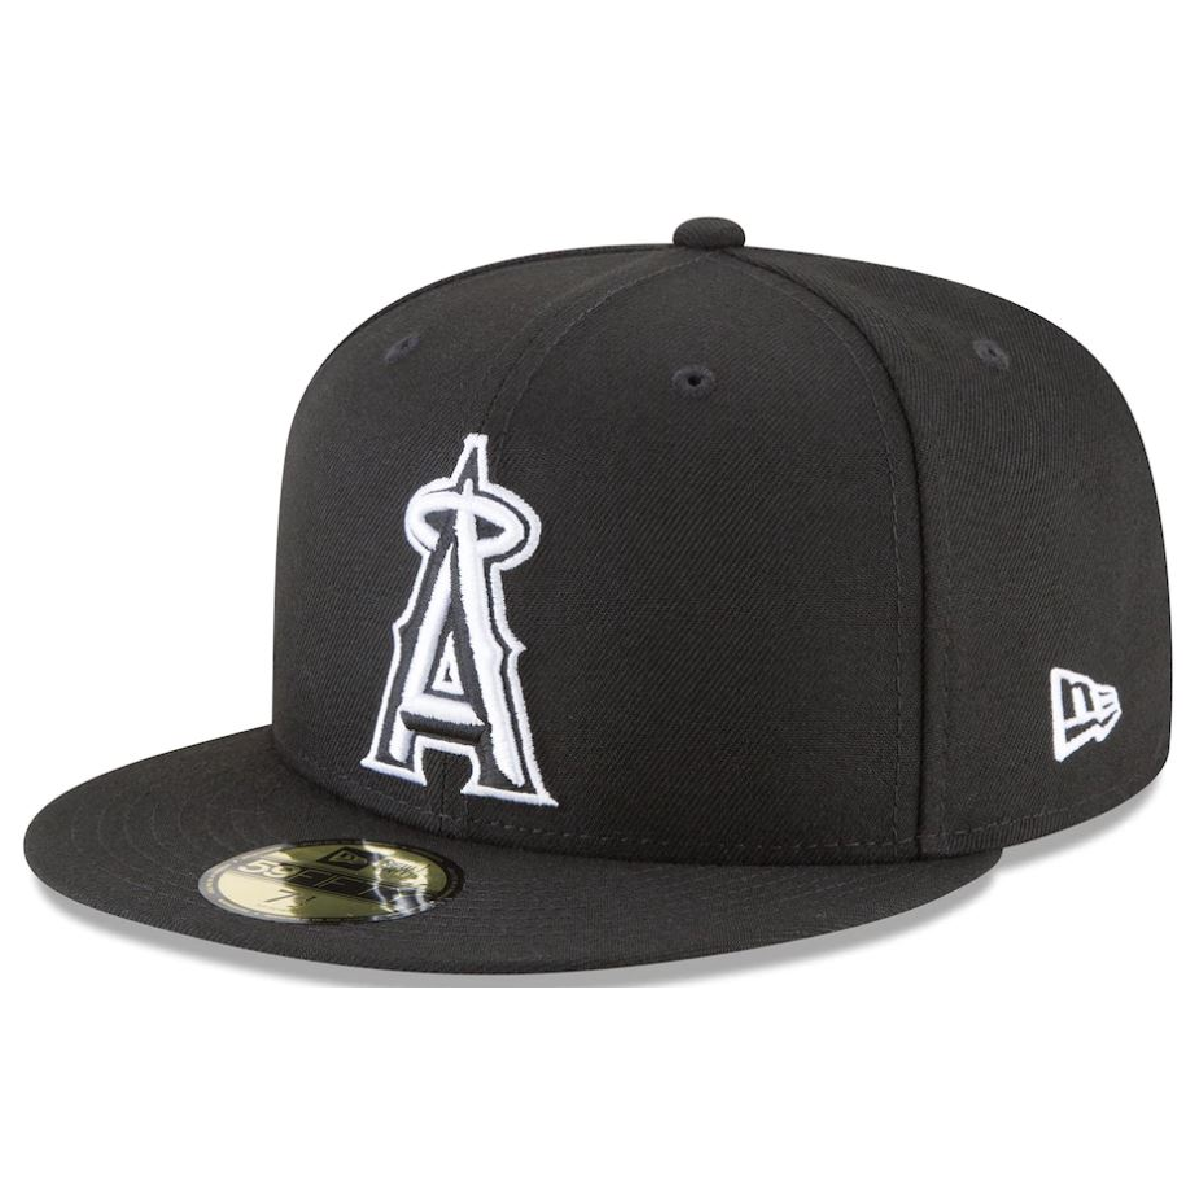 New Era Los Angels Angels Basic Collection 9FIFTY Snapback-Black/White